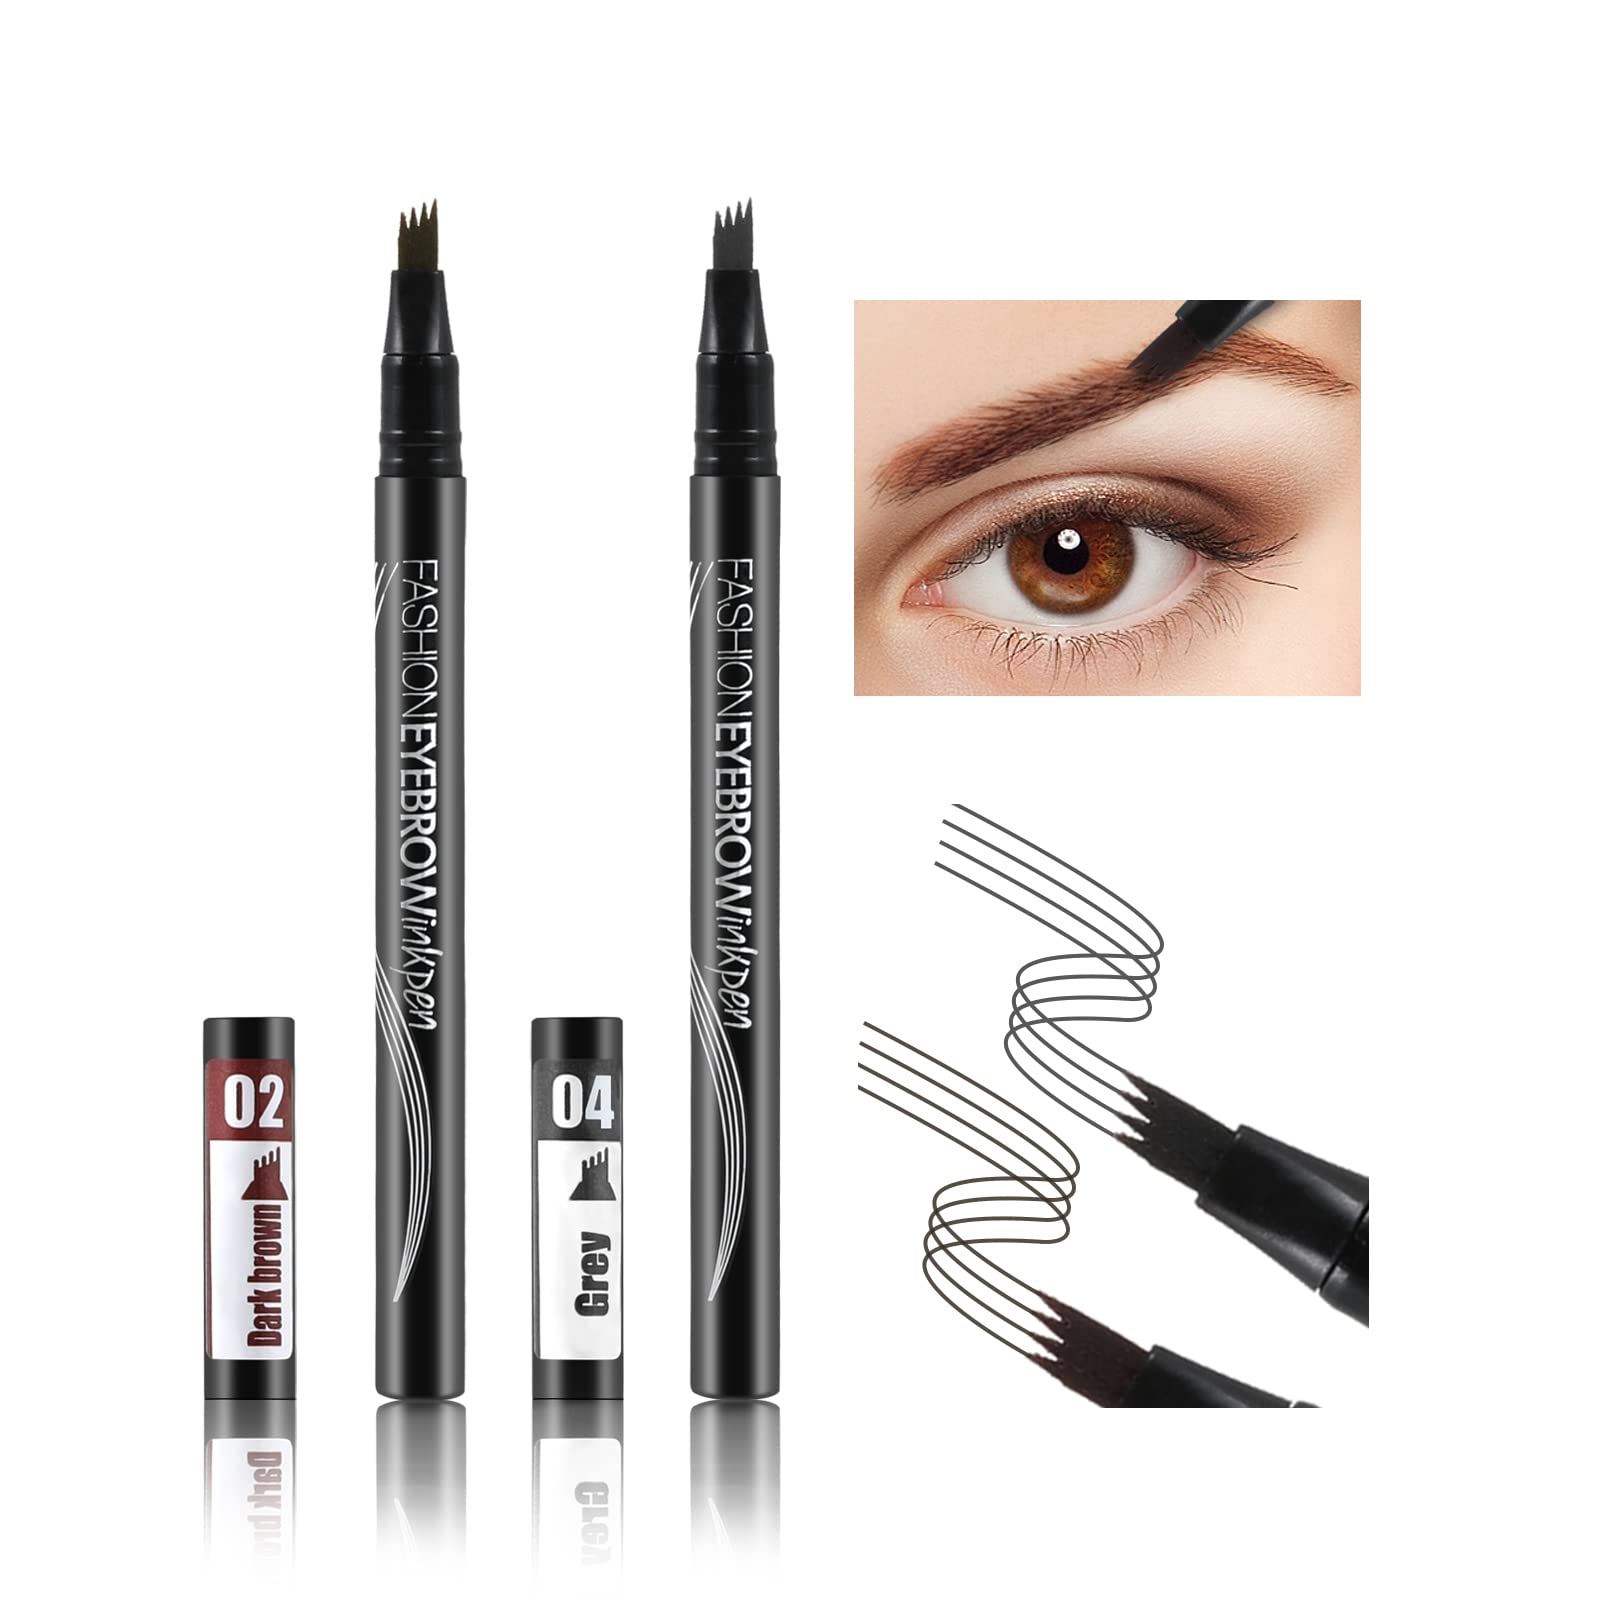 Eyebrow Tattoo Pen Ksndurn Black Eyebrow Pencil - Waterproof Microblade  Brow Pen Eyebrow Tattoo Pen with a Micro-Fork Tip - Natural Looking Eyebrows  Effortlessly with Gift